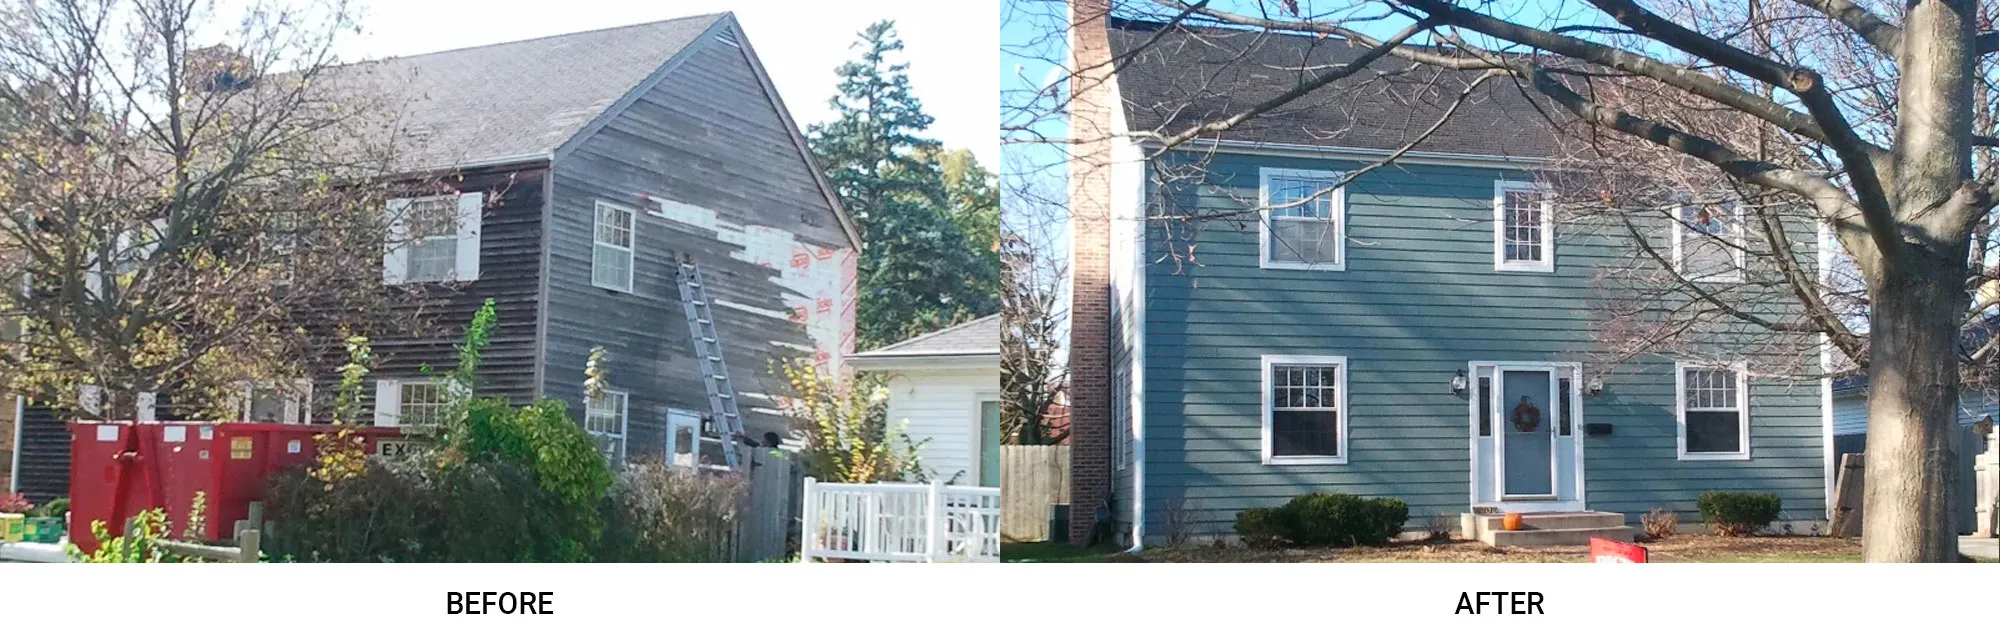 Siding Before After 4